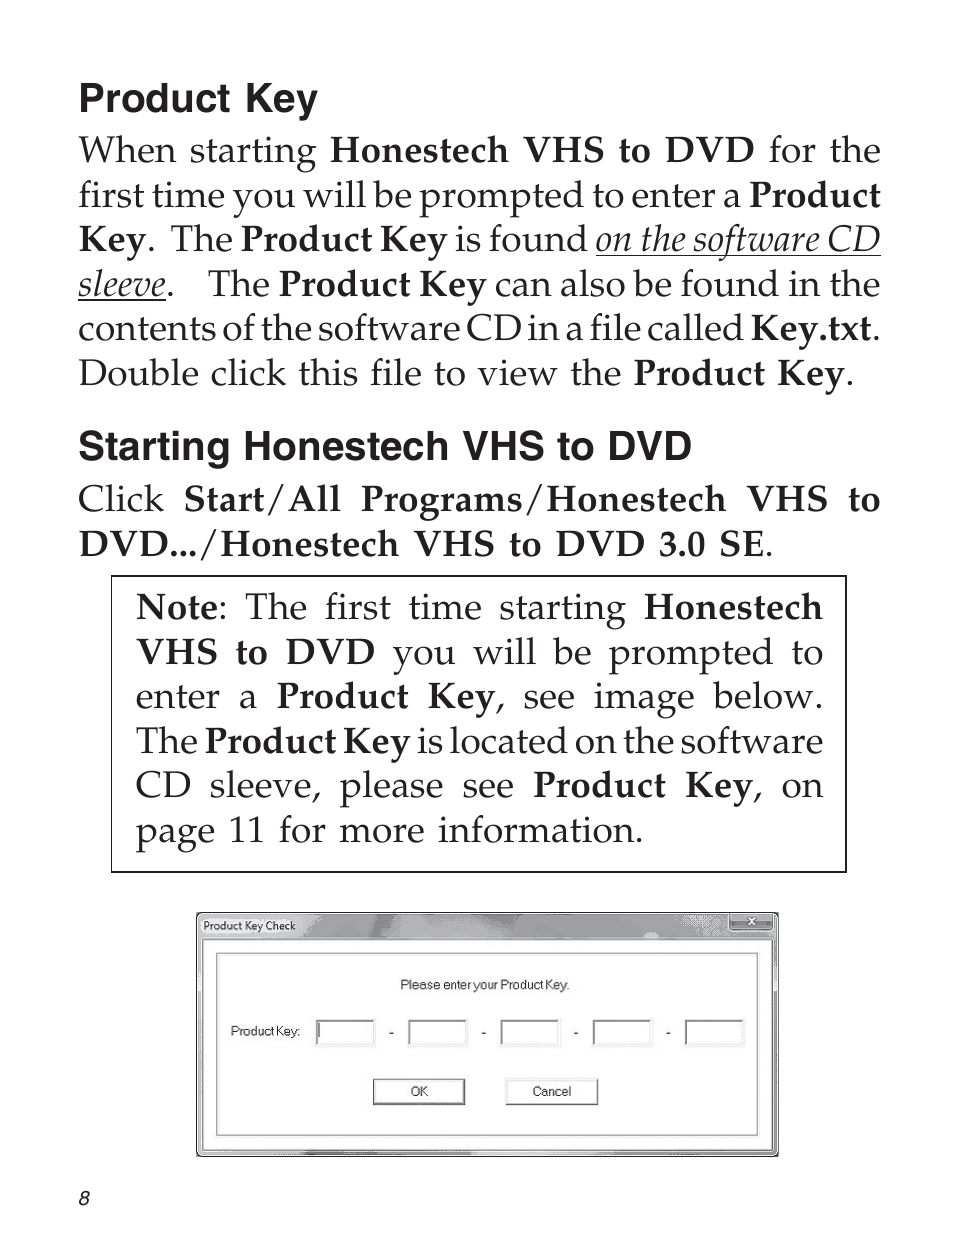 honestech vhs to dvd 7.0 deluxe troubleshooting